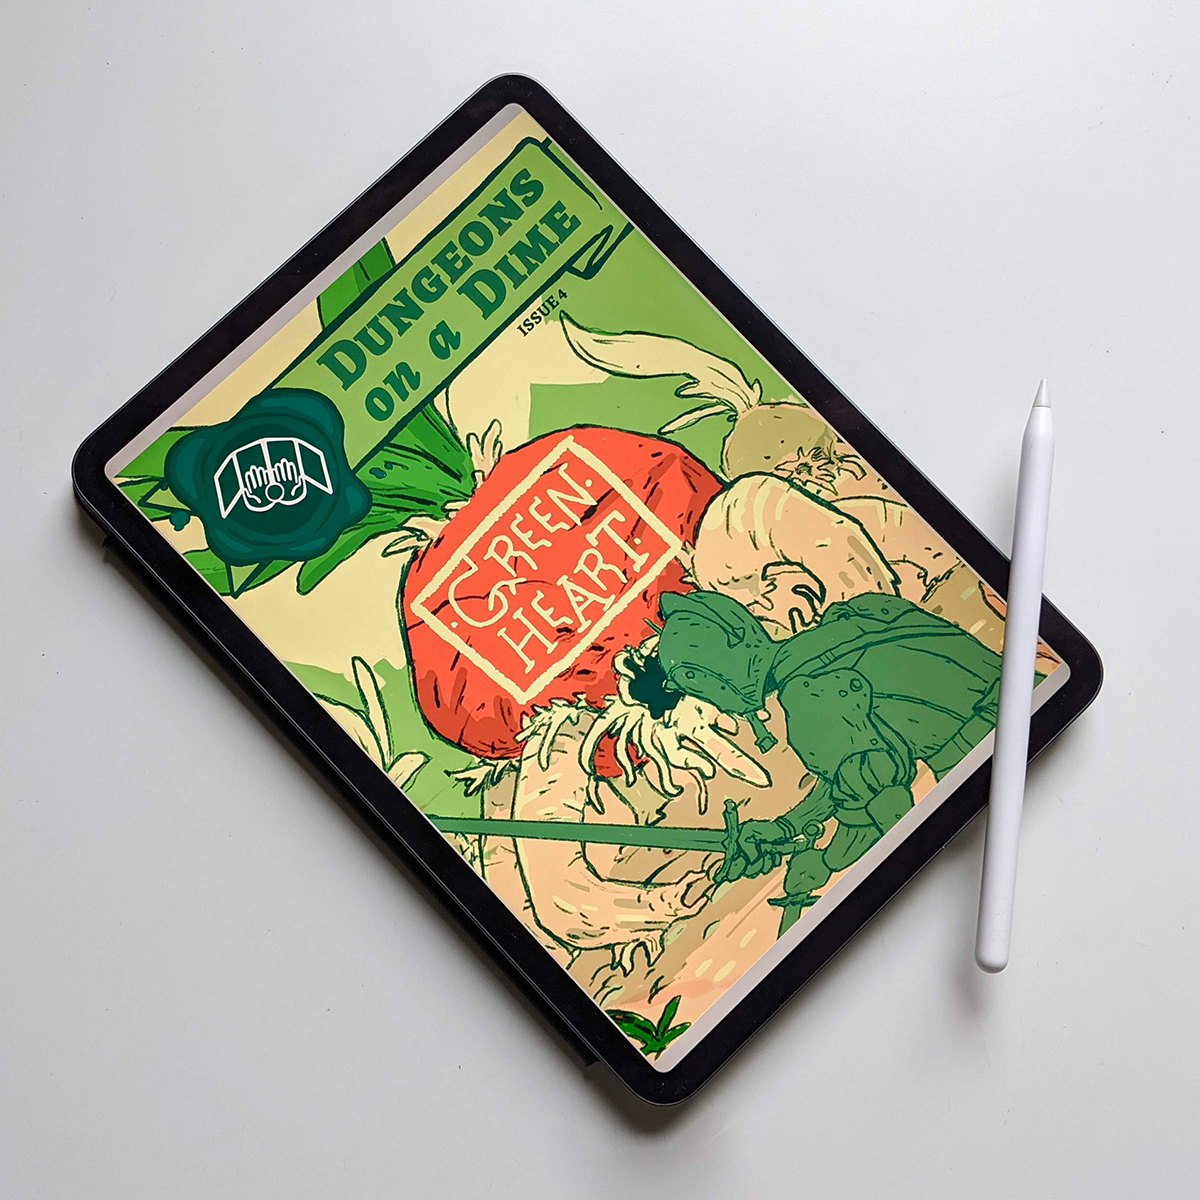 Image shows: an iPad Pro tablet with an Apple Pencil stylus balancing on the corner. The screen shows the front cover for Greenheart. A giant turnip monster approaches an armour clad warrior wielding a sword and dagger, who stands between the monster and us the viewer.